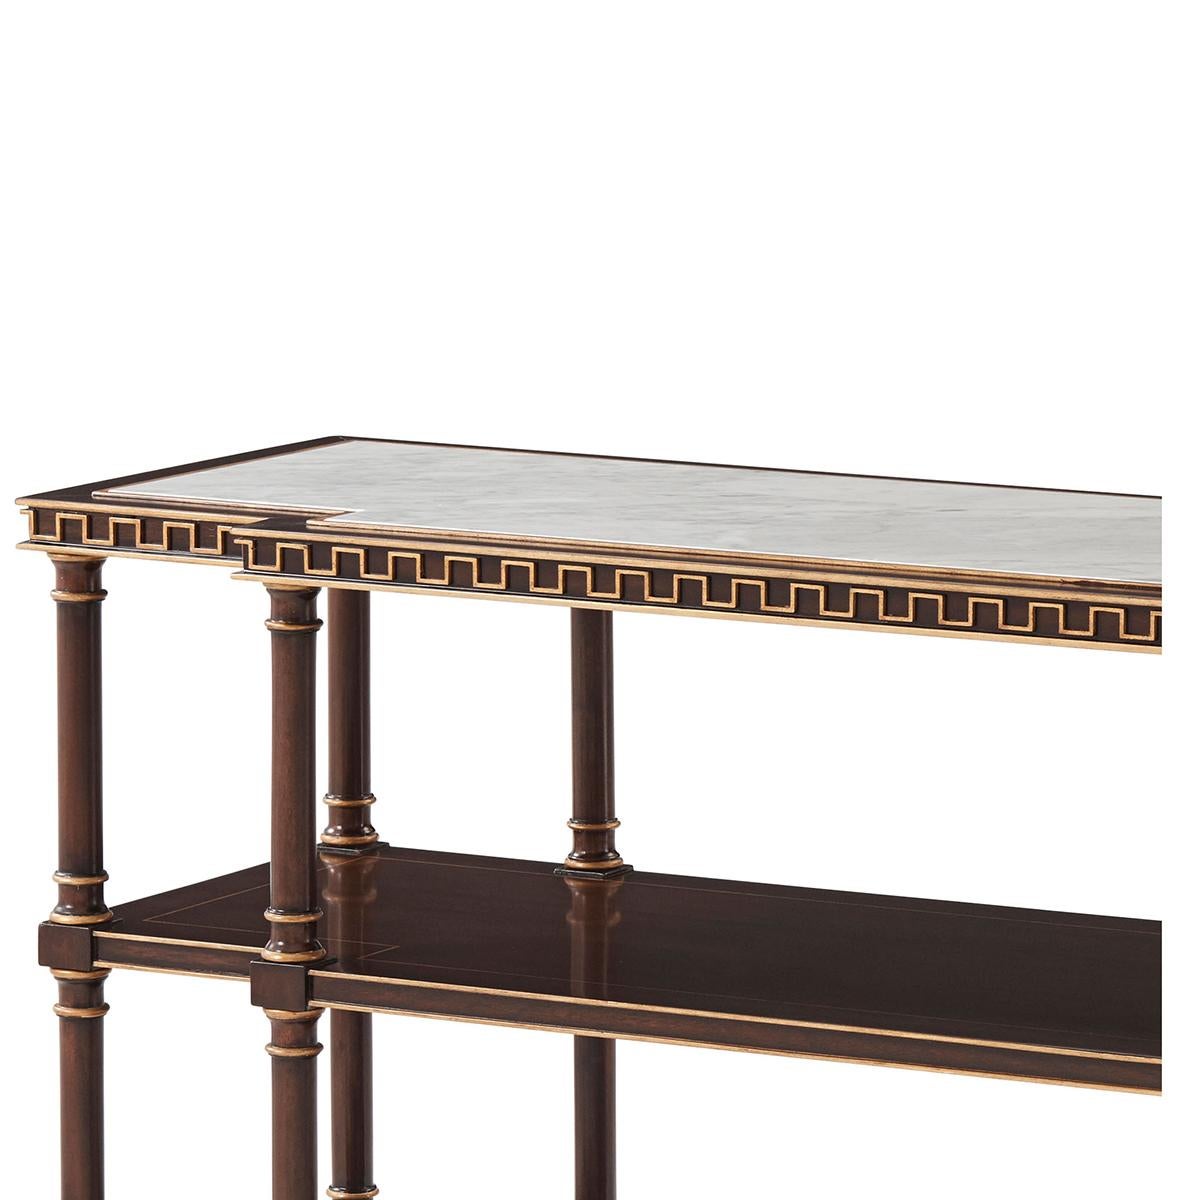 This exquisite table blends the luxurious charm of Bianco Carrara marble with the practicality of English furniture design. The top tier of this multi-level table showcases a stunning marble surface, edged with a decorative gilded frame that